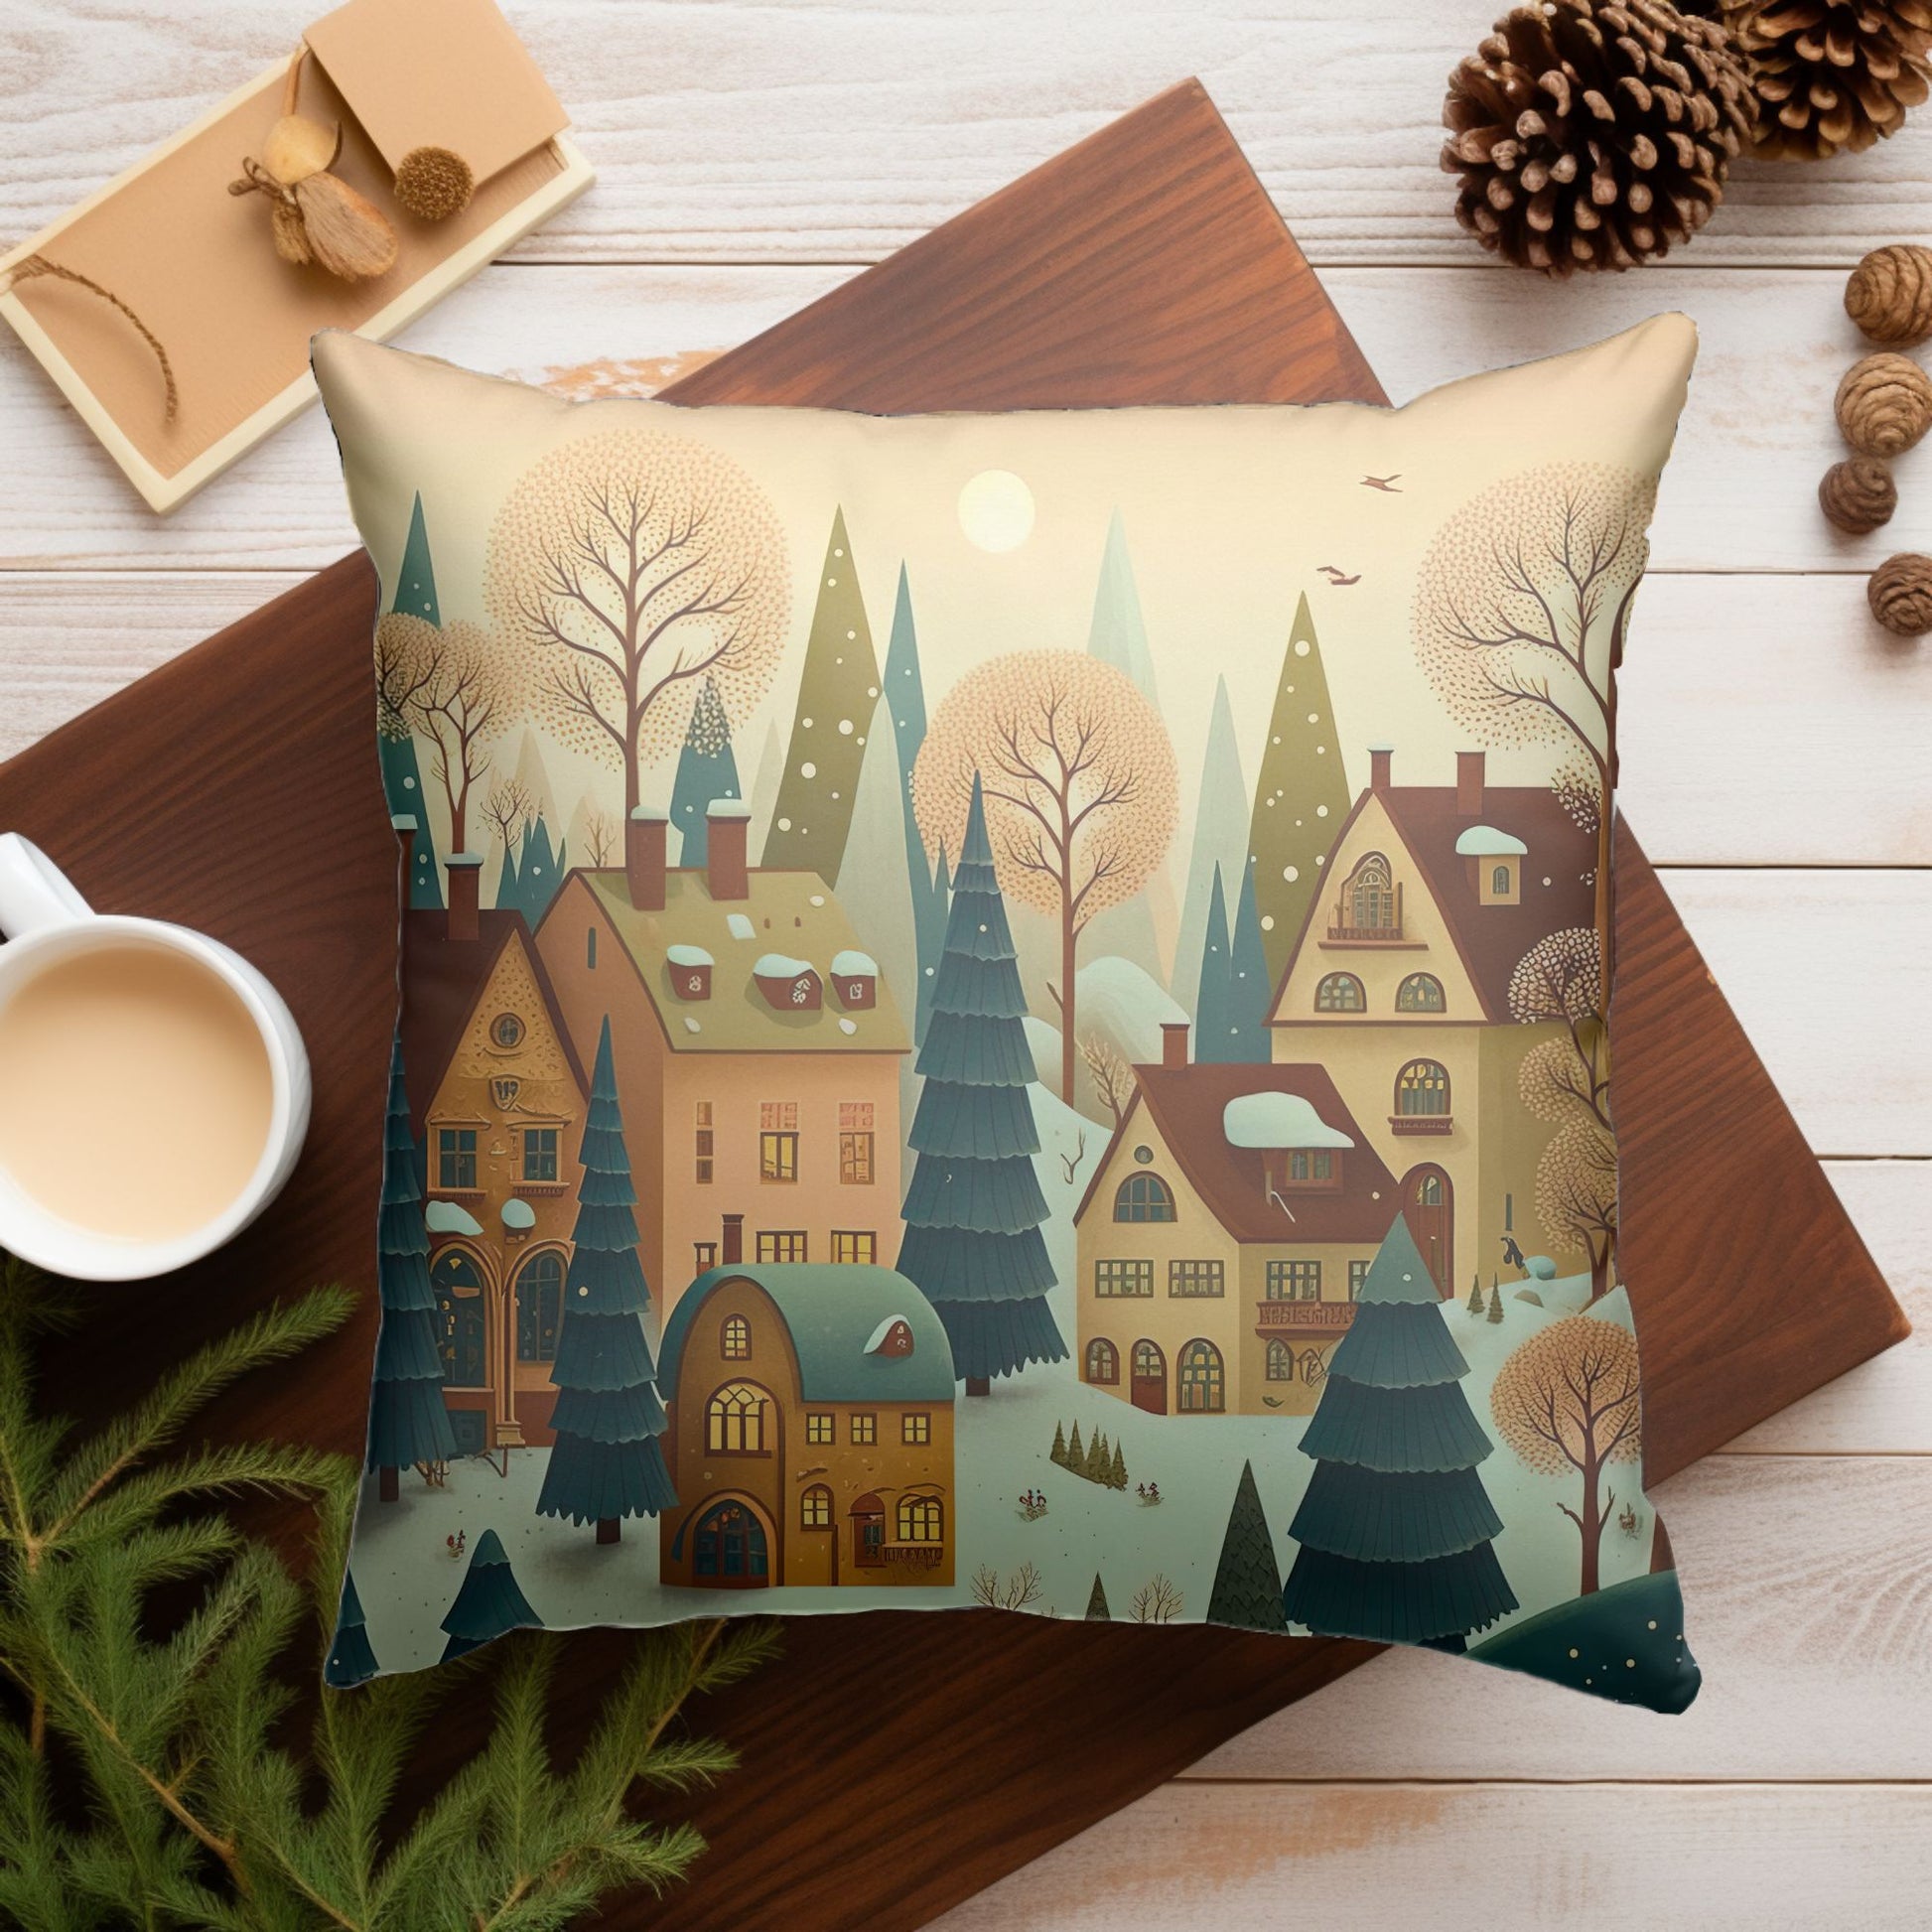 Close-up of the Christmas Village Pattern on the Pillow